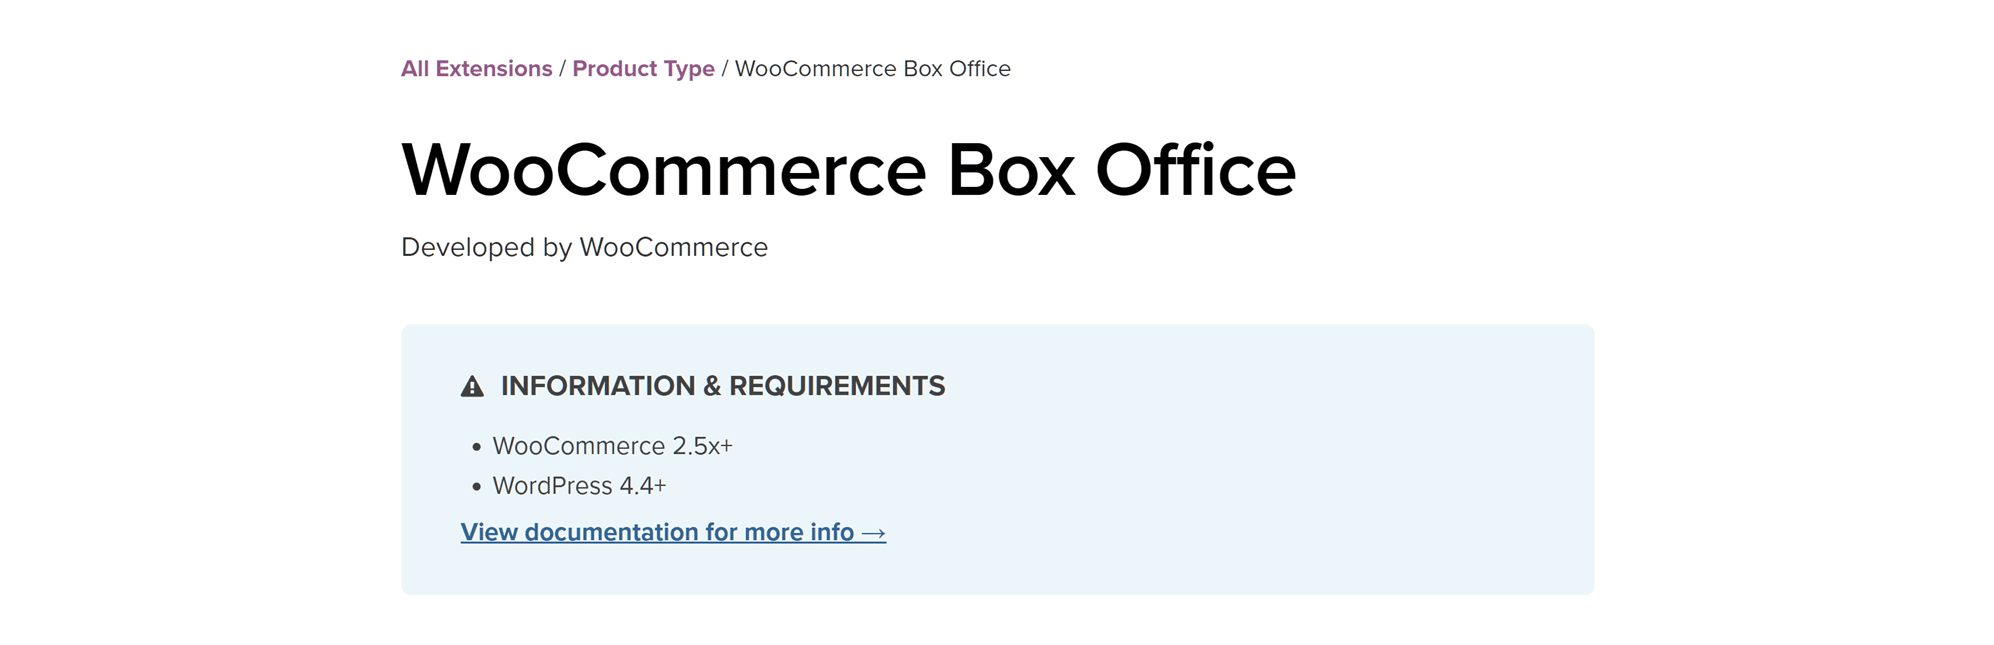 Selling Tickets From Your WordPress Website with WooCommerce Box Office